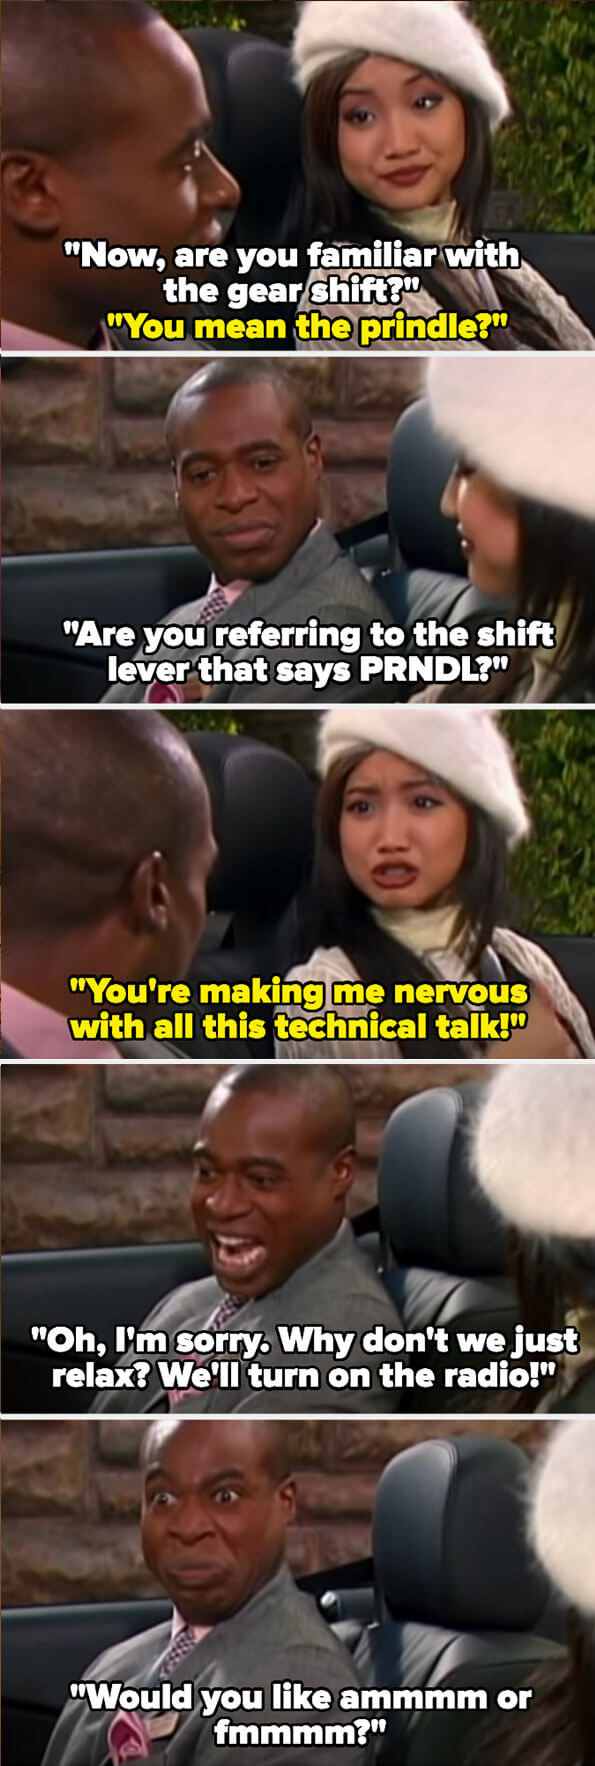 London calls the gear shift the PRNDL based on its letters and then gets flustered when Mr. Moseby gets angry, so he suggests they turn on the radio and asks if she wants ammmm or fmmmm